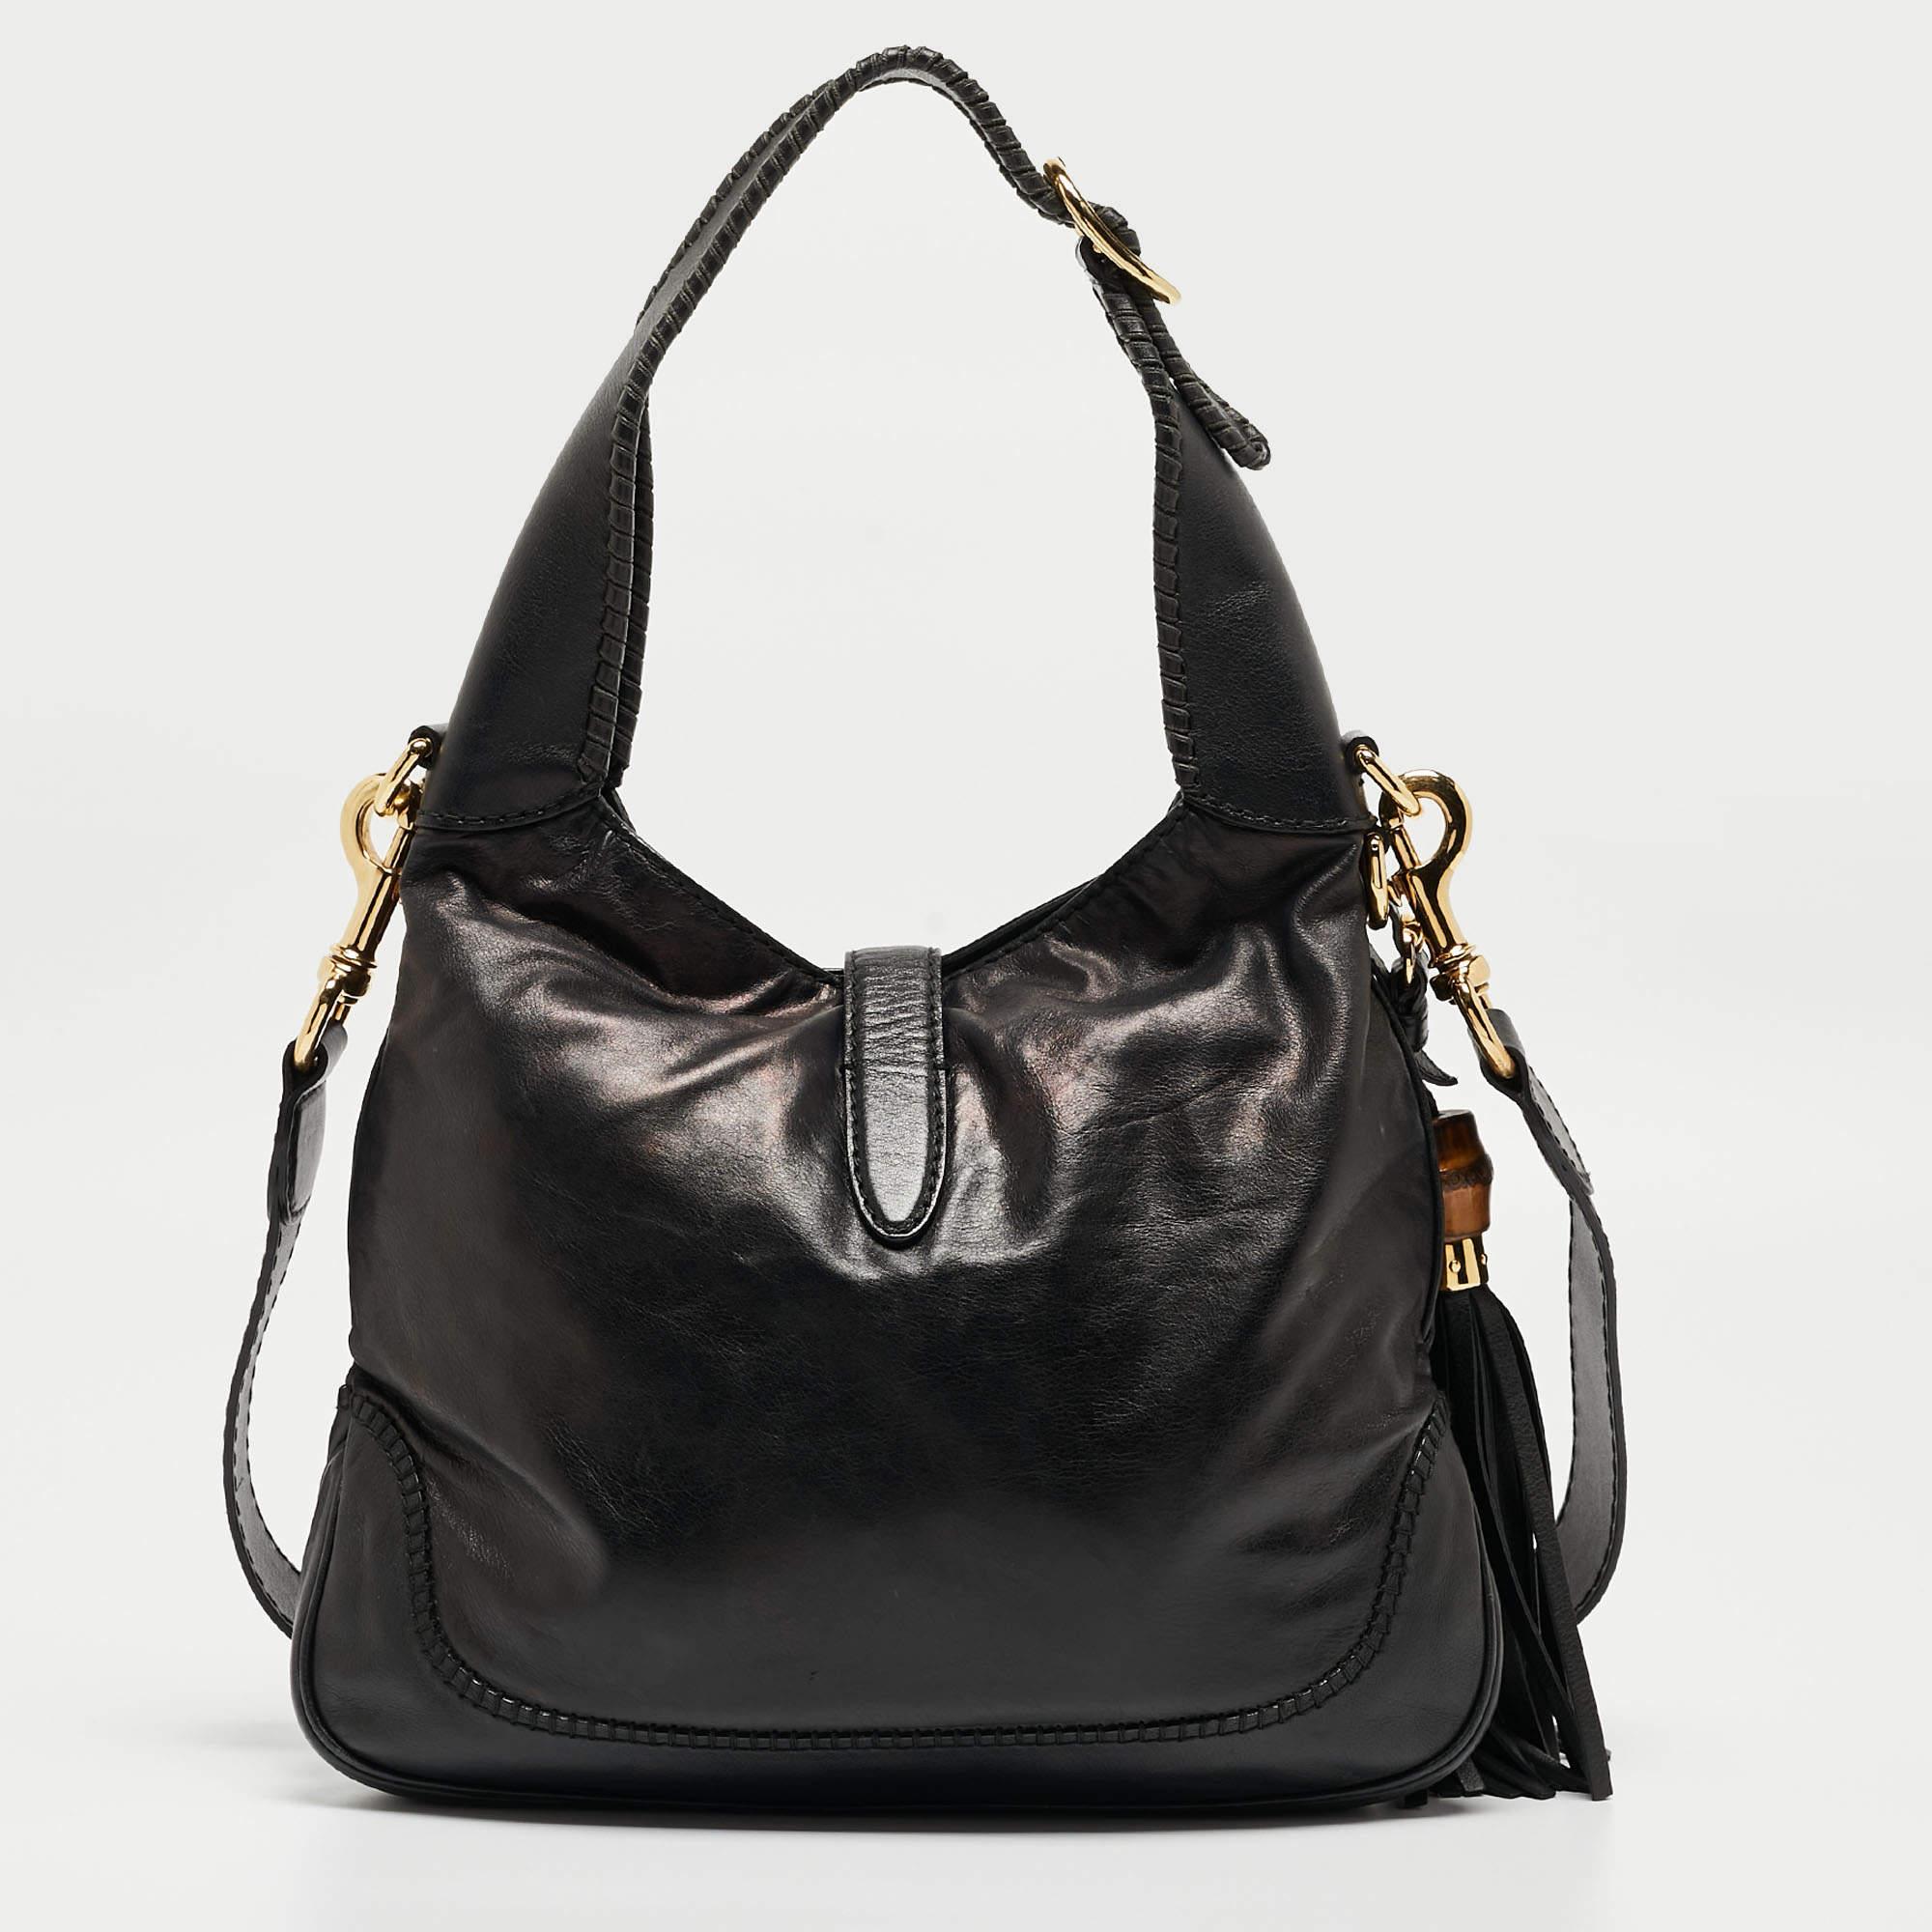 Stylish handbags never fail to make a fashionable impression. Make this designer hobo yours by pairing it with your sophisticated workwear as well as chic casual looks.

Includes: Original Dustbag, Detachable Strap

